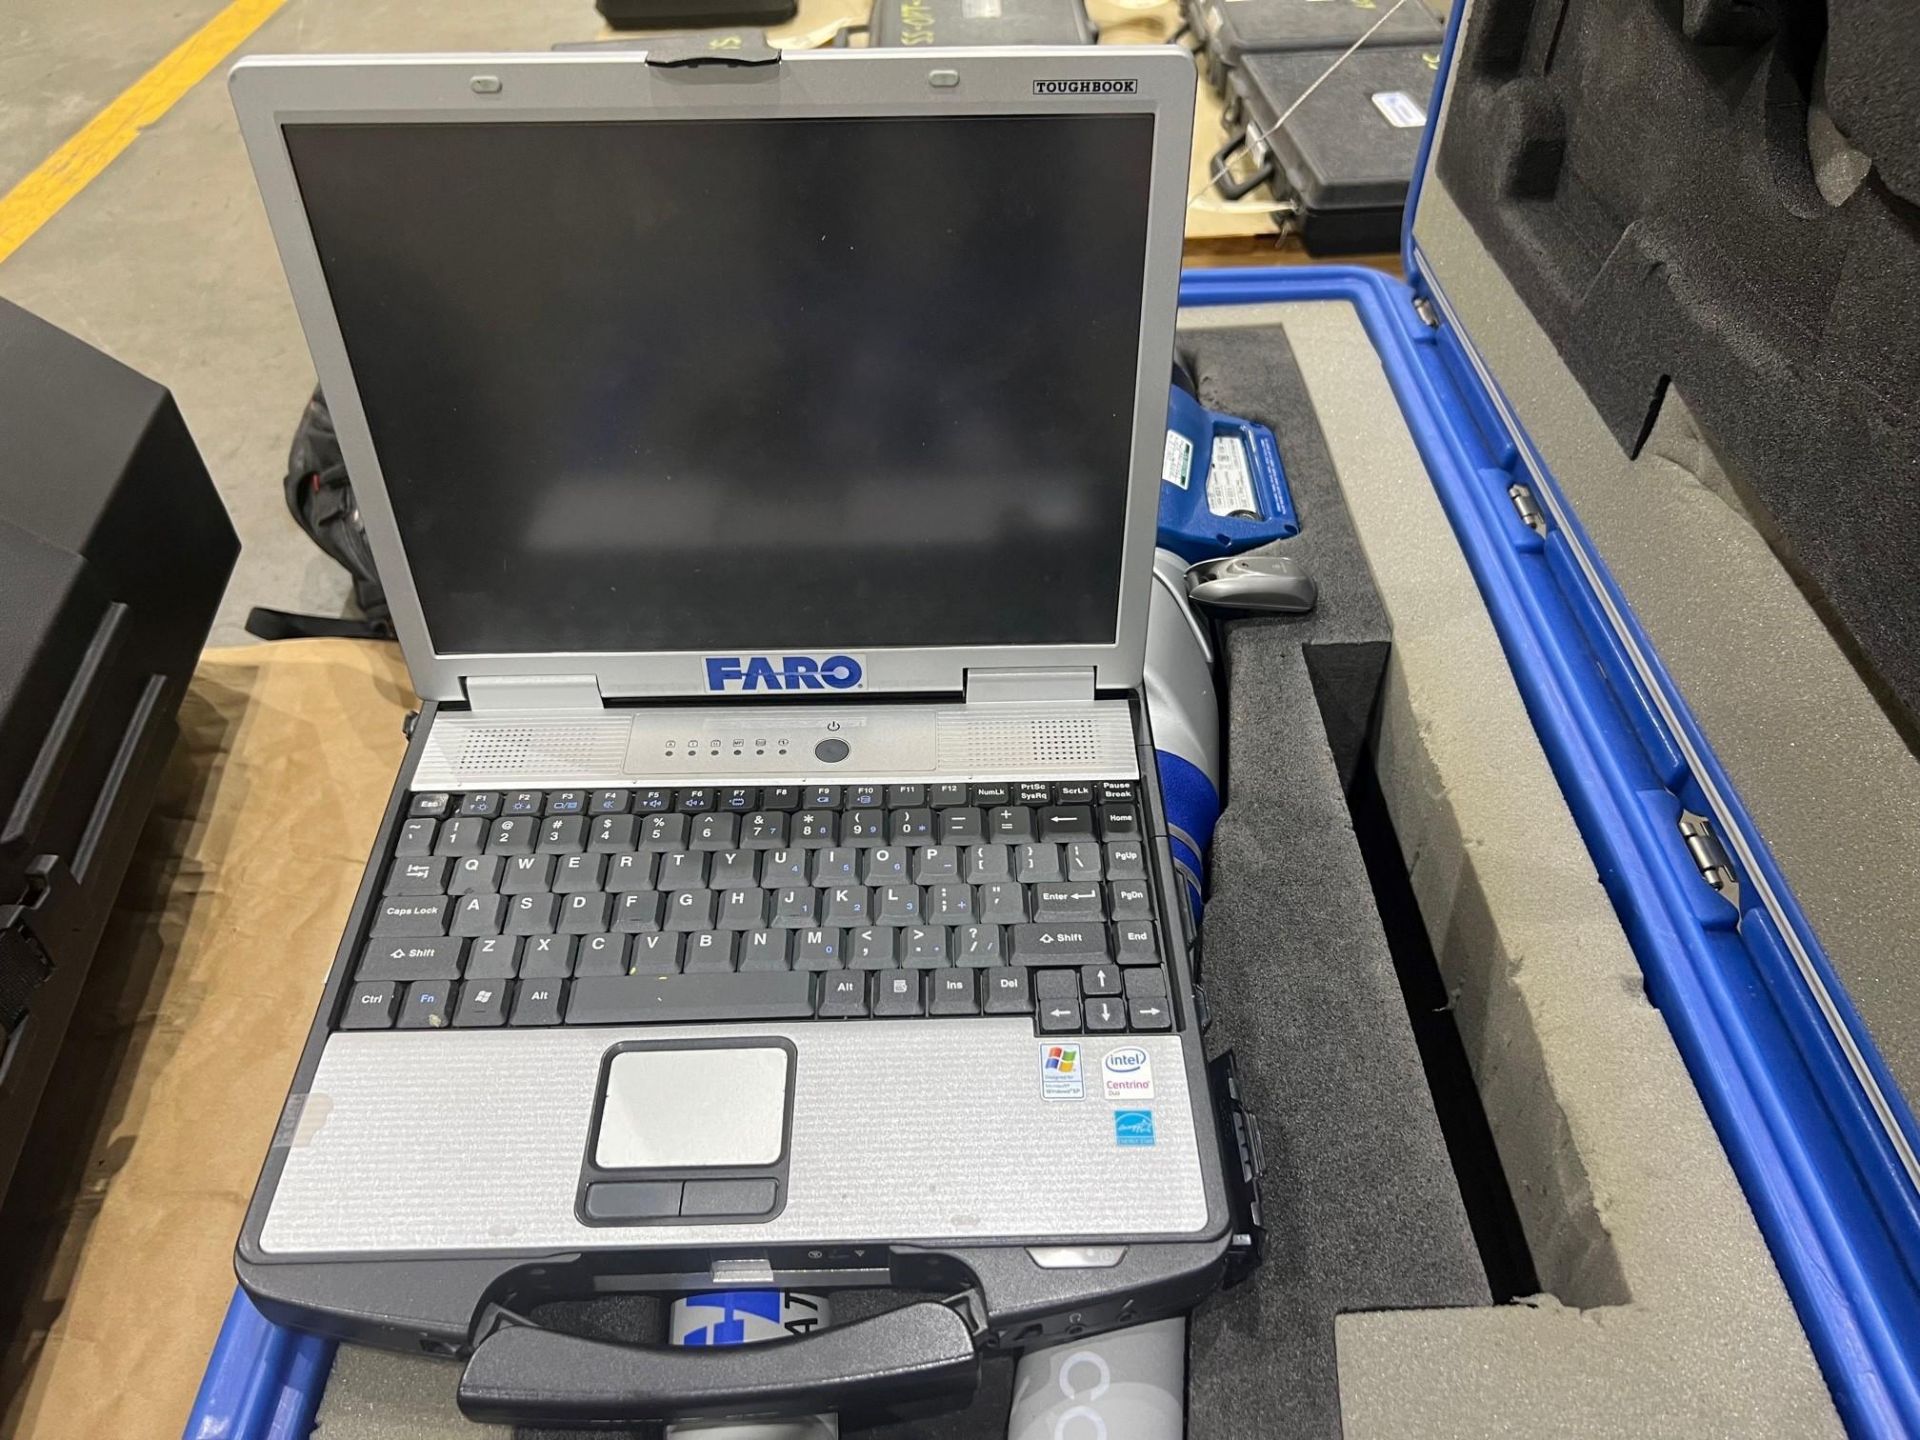 Faro Arm with Laptop and Backpack supplies - Image 14 of 18